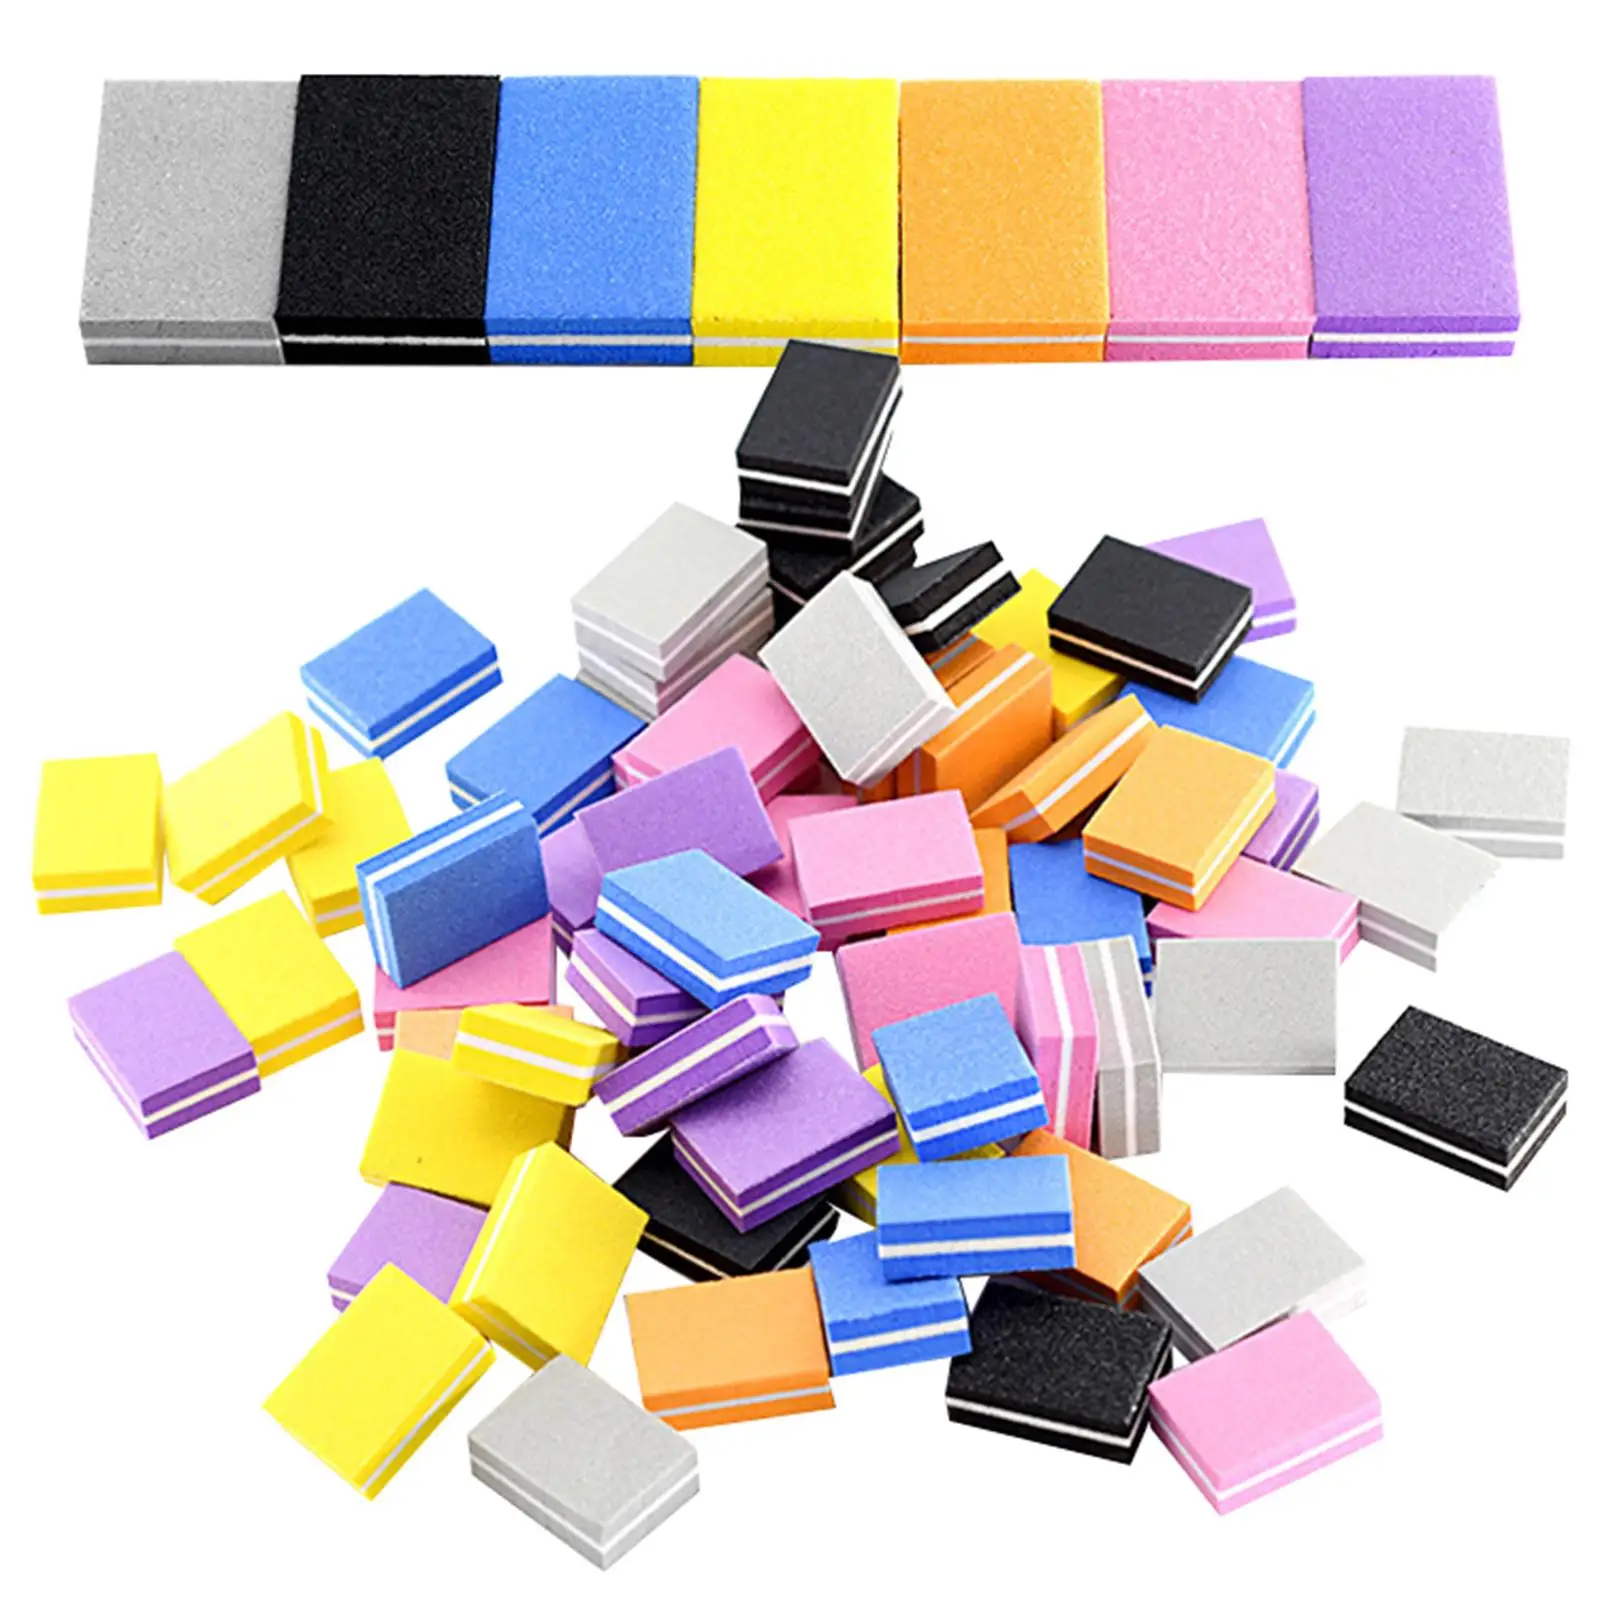 Set of 100 Nail Buffer Block Professional 100/180 Grit Sanding Buffing Polisher for Manicure Pedicure Tool Salon Personal Use